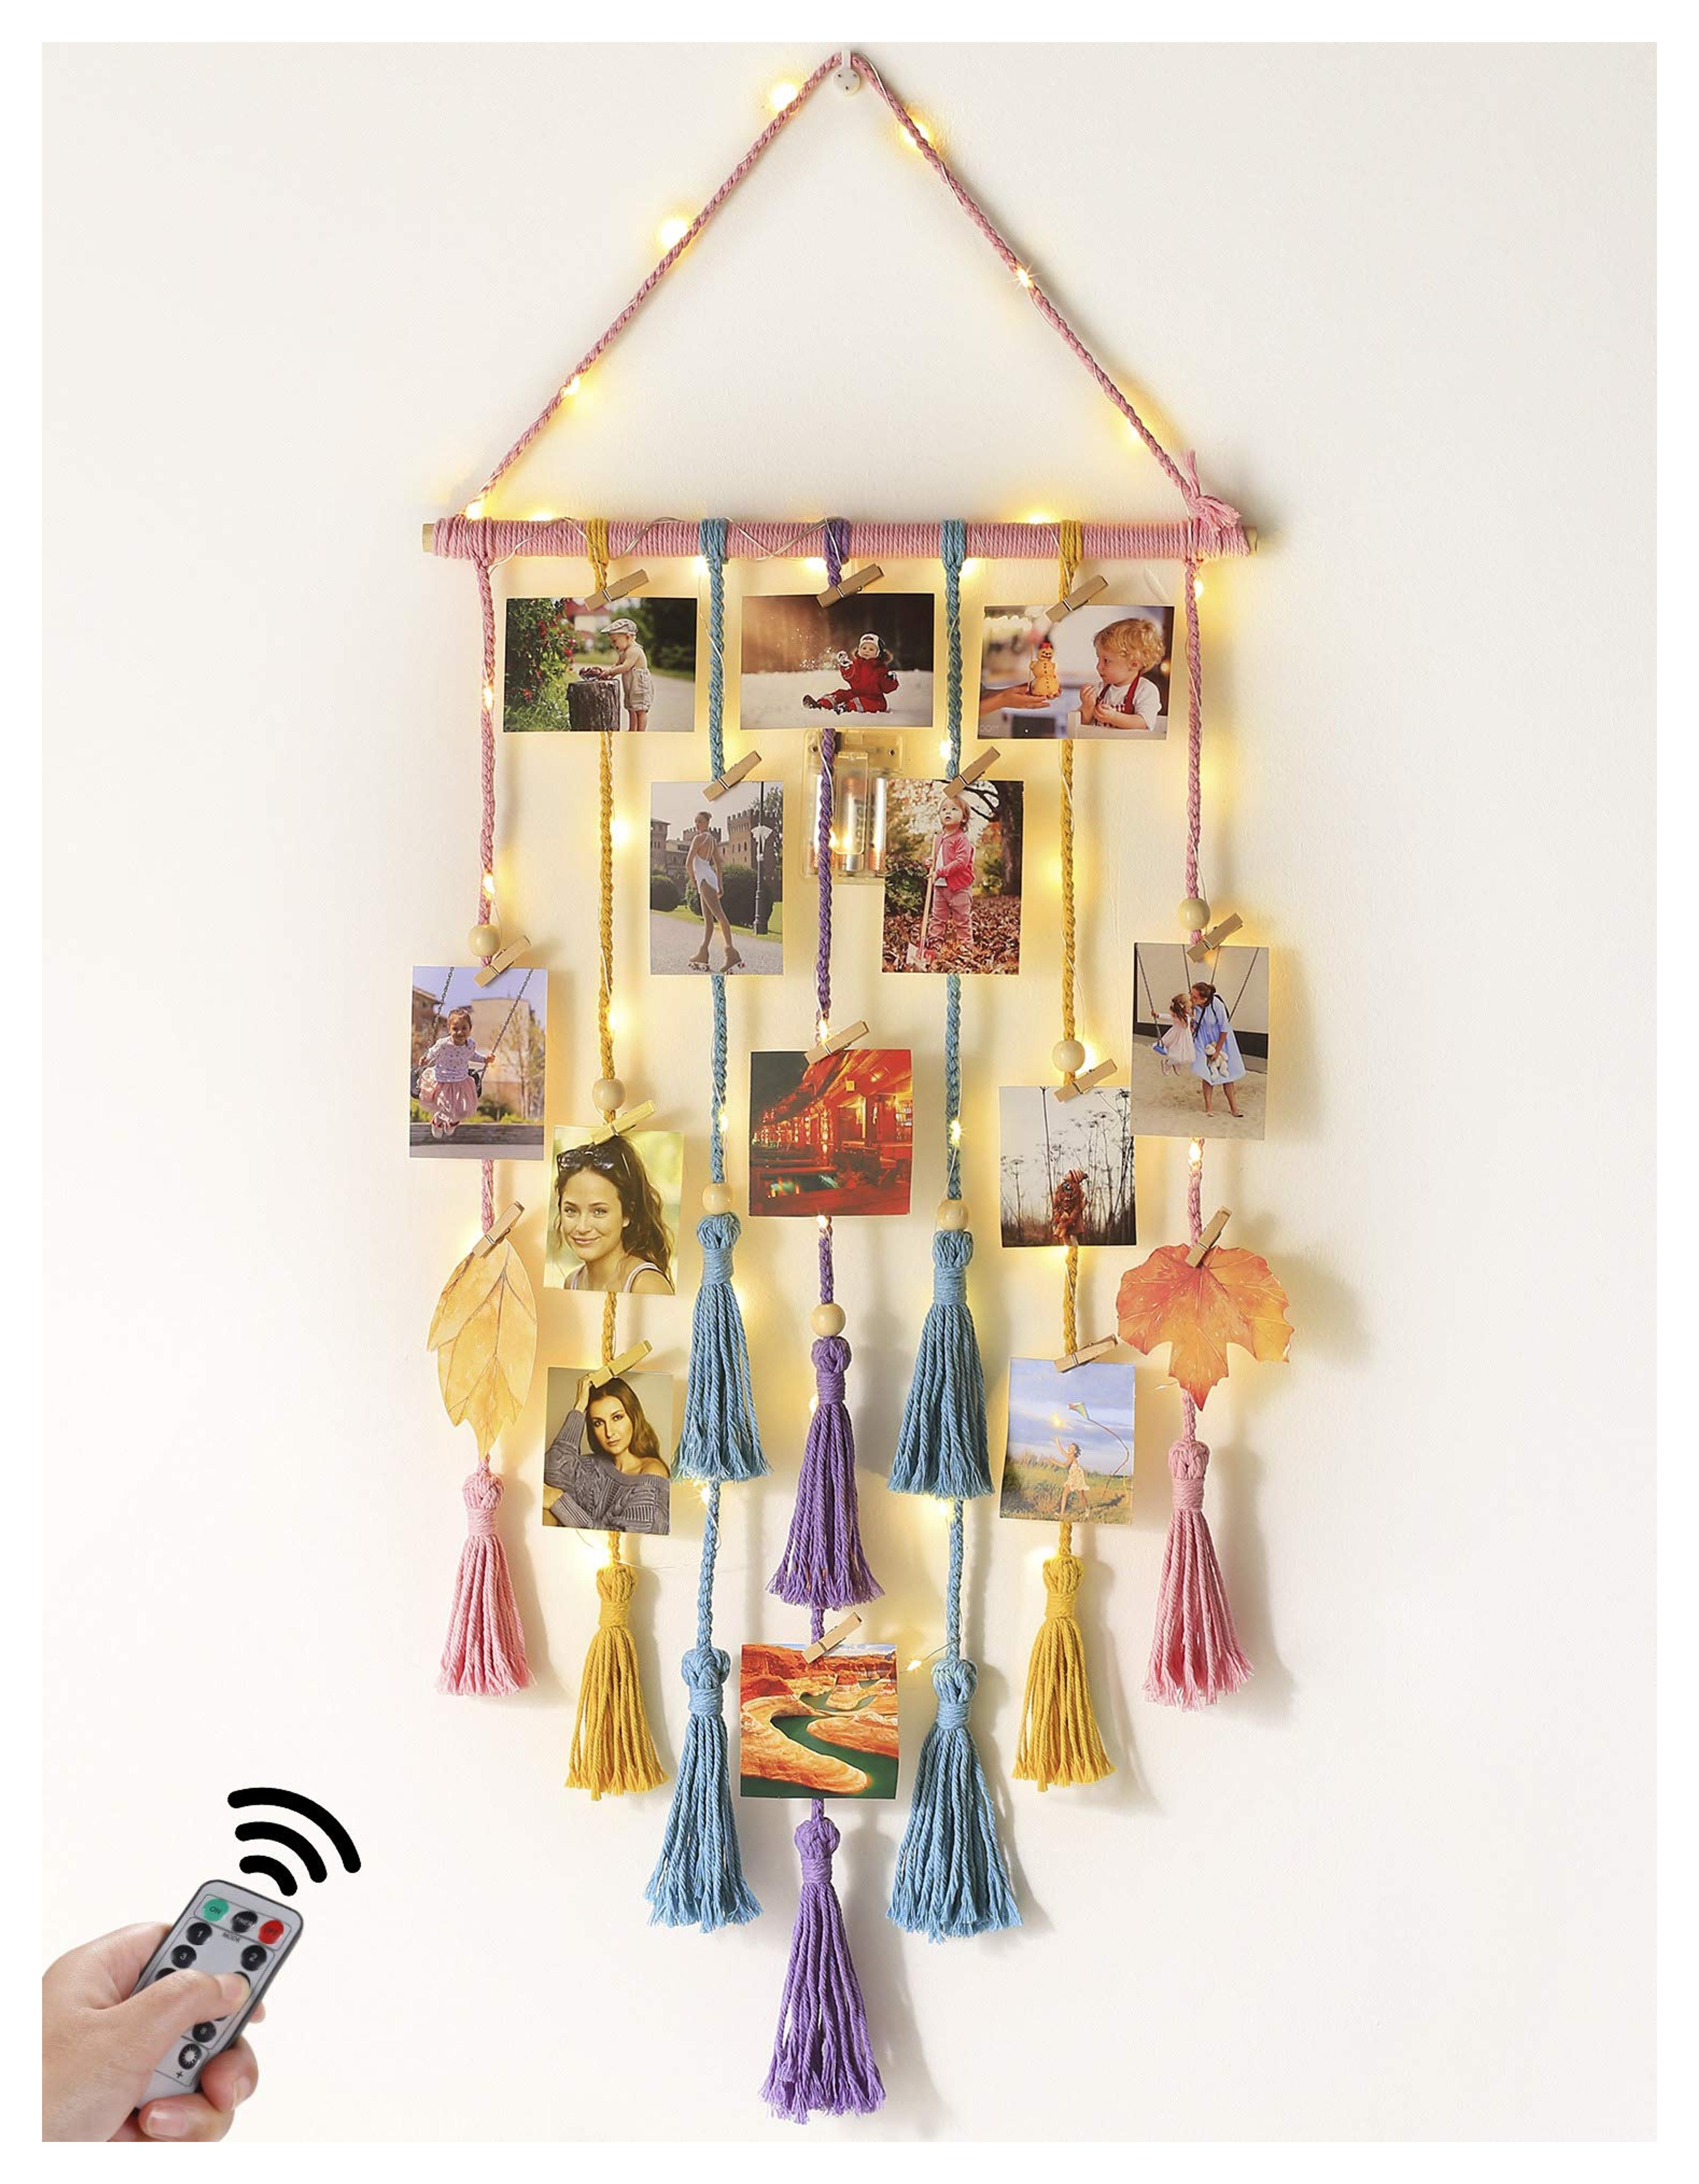 Amazon.com: Room Decor for Teen Girls, Hanging Photo Display Macrame Picture Collage Wall Decor, Boho Decor for Bedroom Apartment Living Room Dorm with Remote String Light, Birthday Gifts for Teenage Girls Ideas : Home & Kitchen